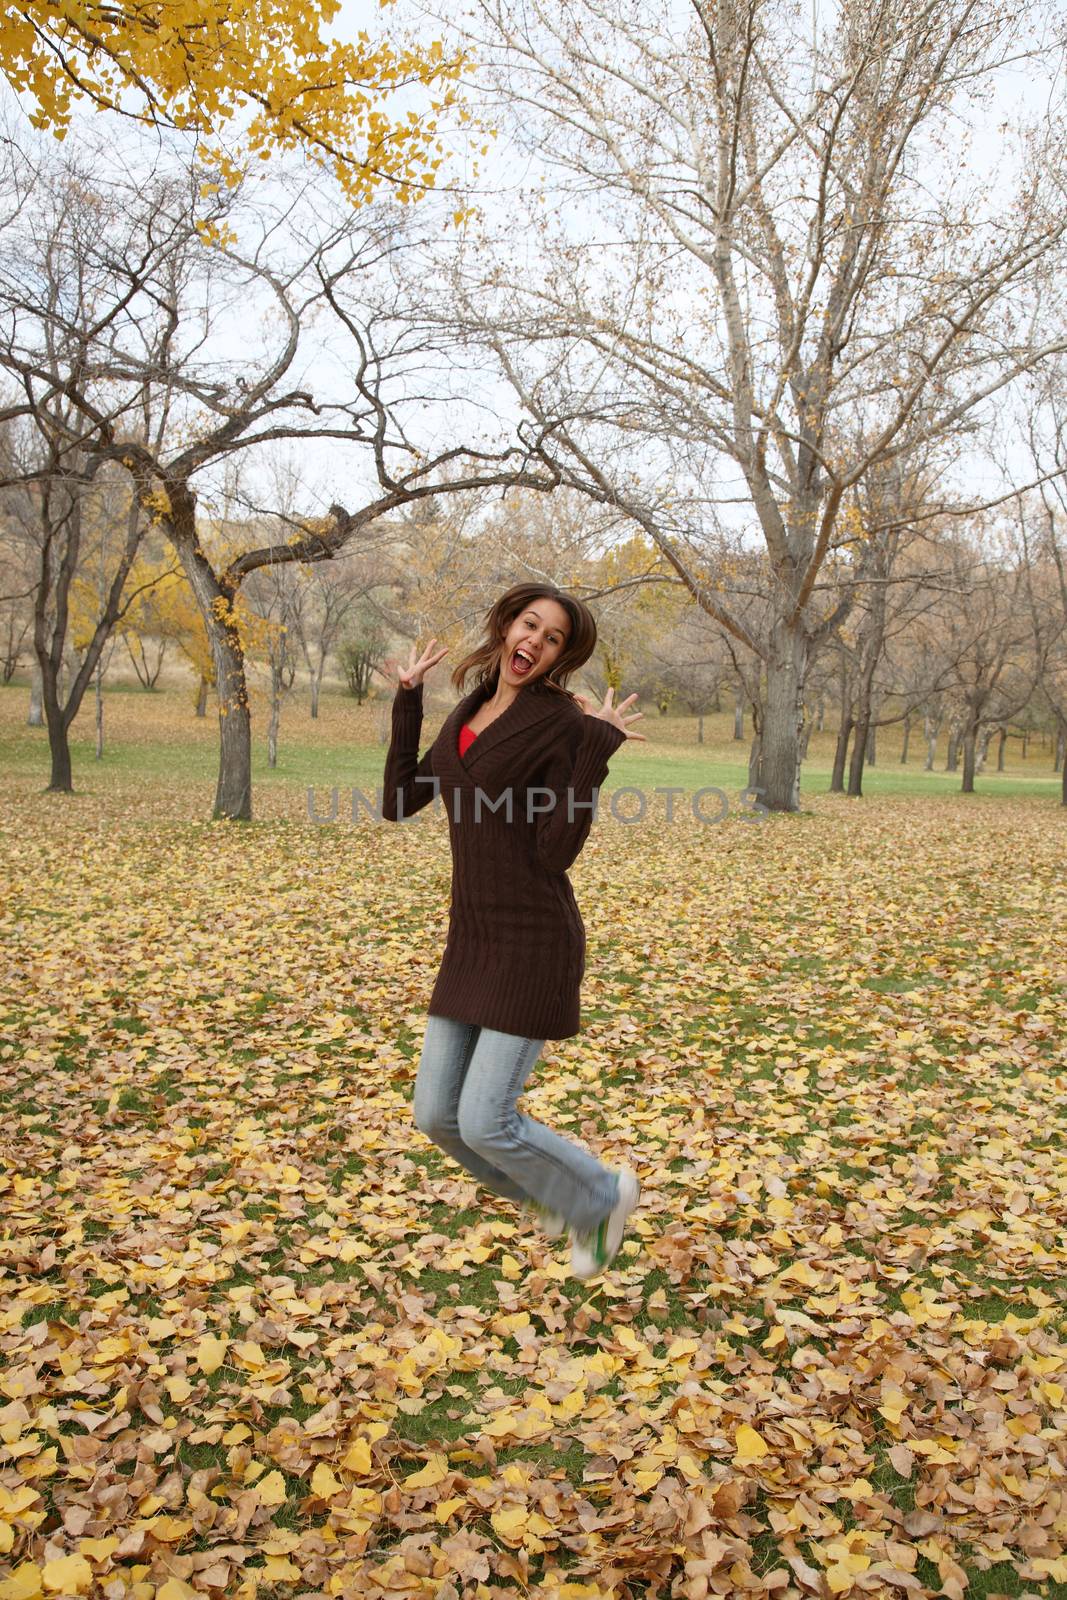 Happy girl jumping for joy.  Focus on face.  Motion blur in feet.